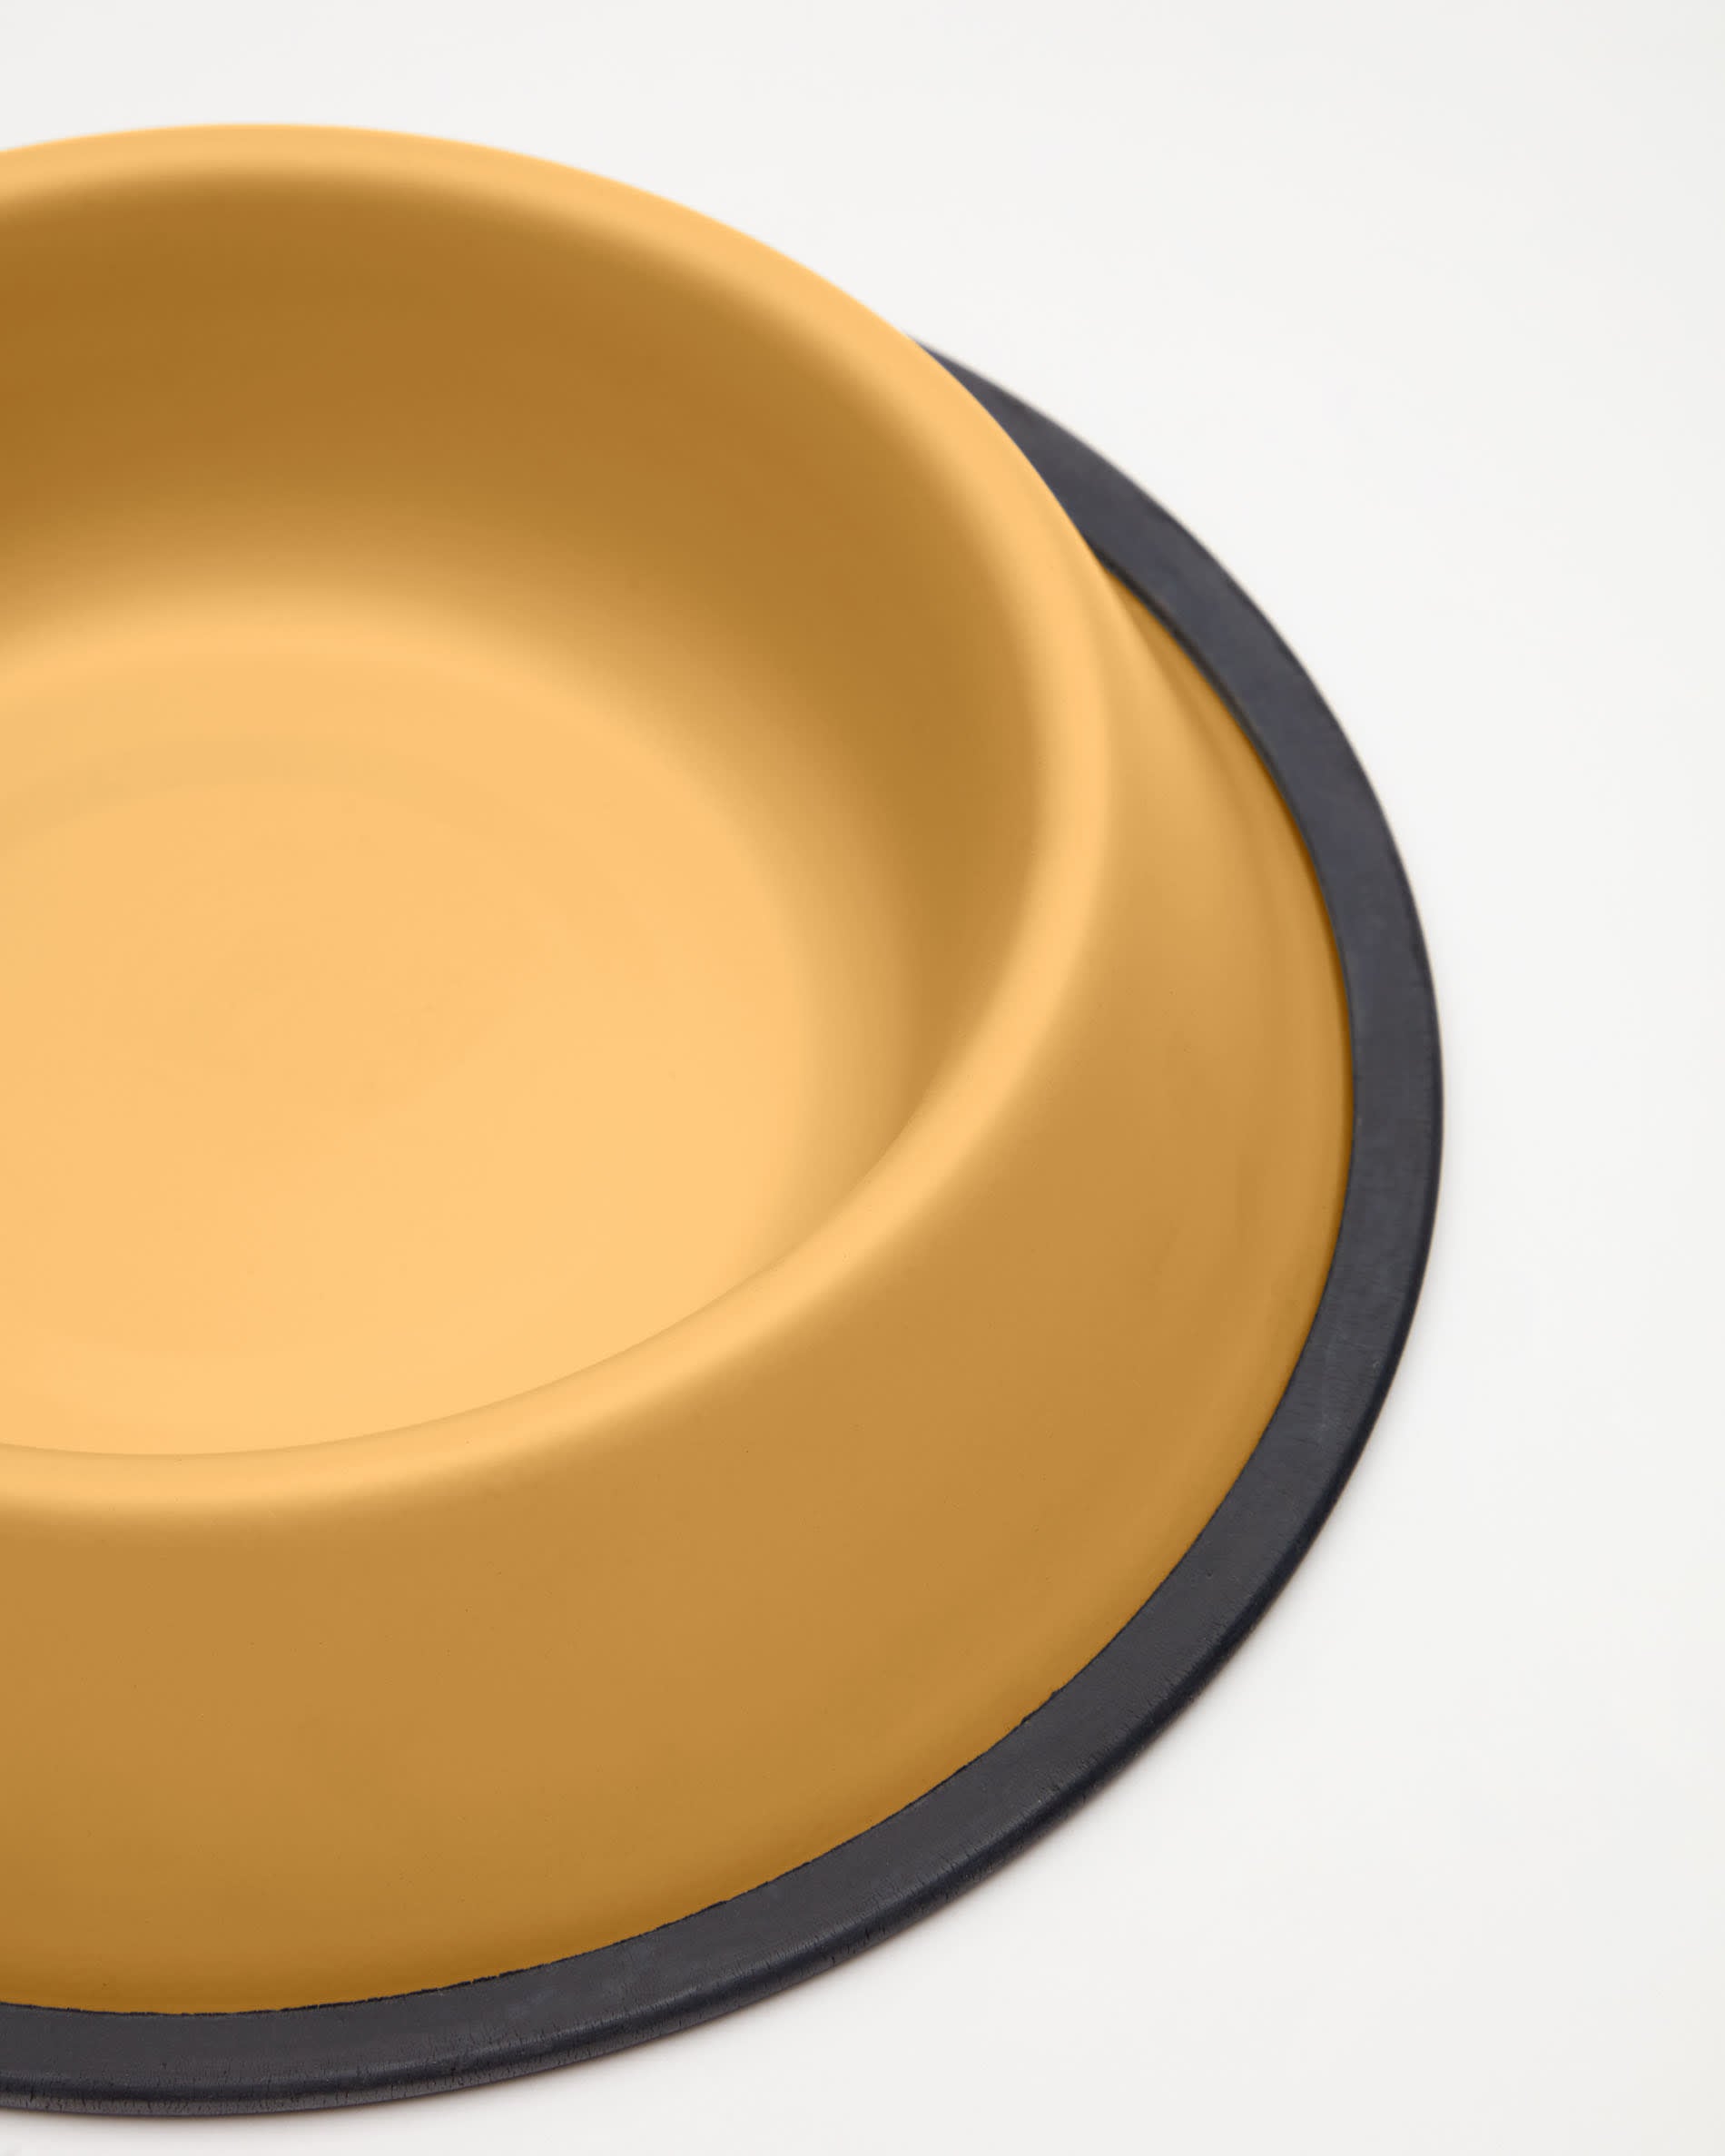 Dalitso set of 2 large food and water bowls for pets, in mustard anti-rust steel, Ø 25 cm